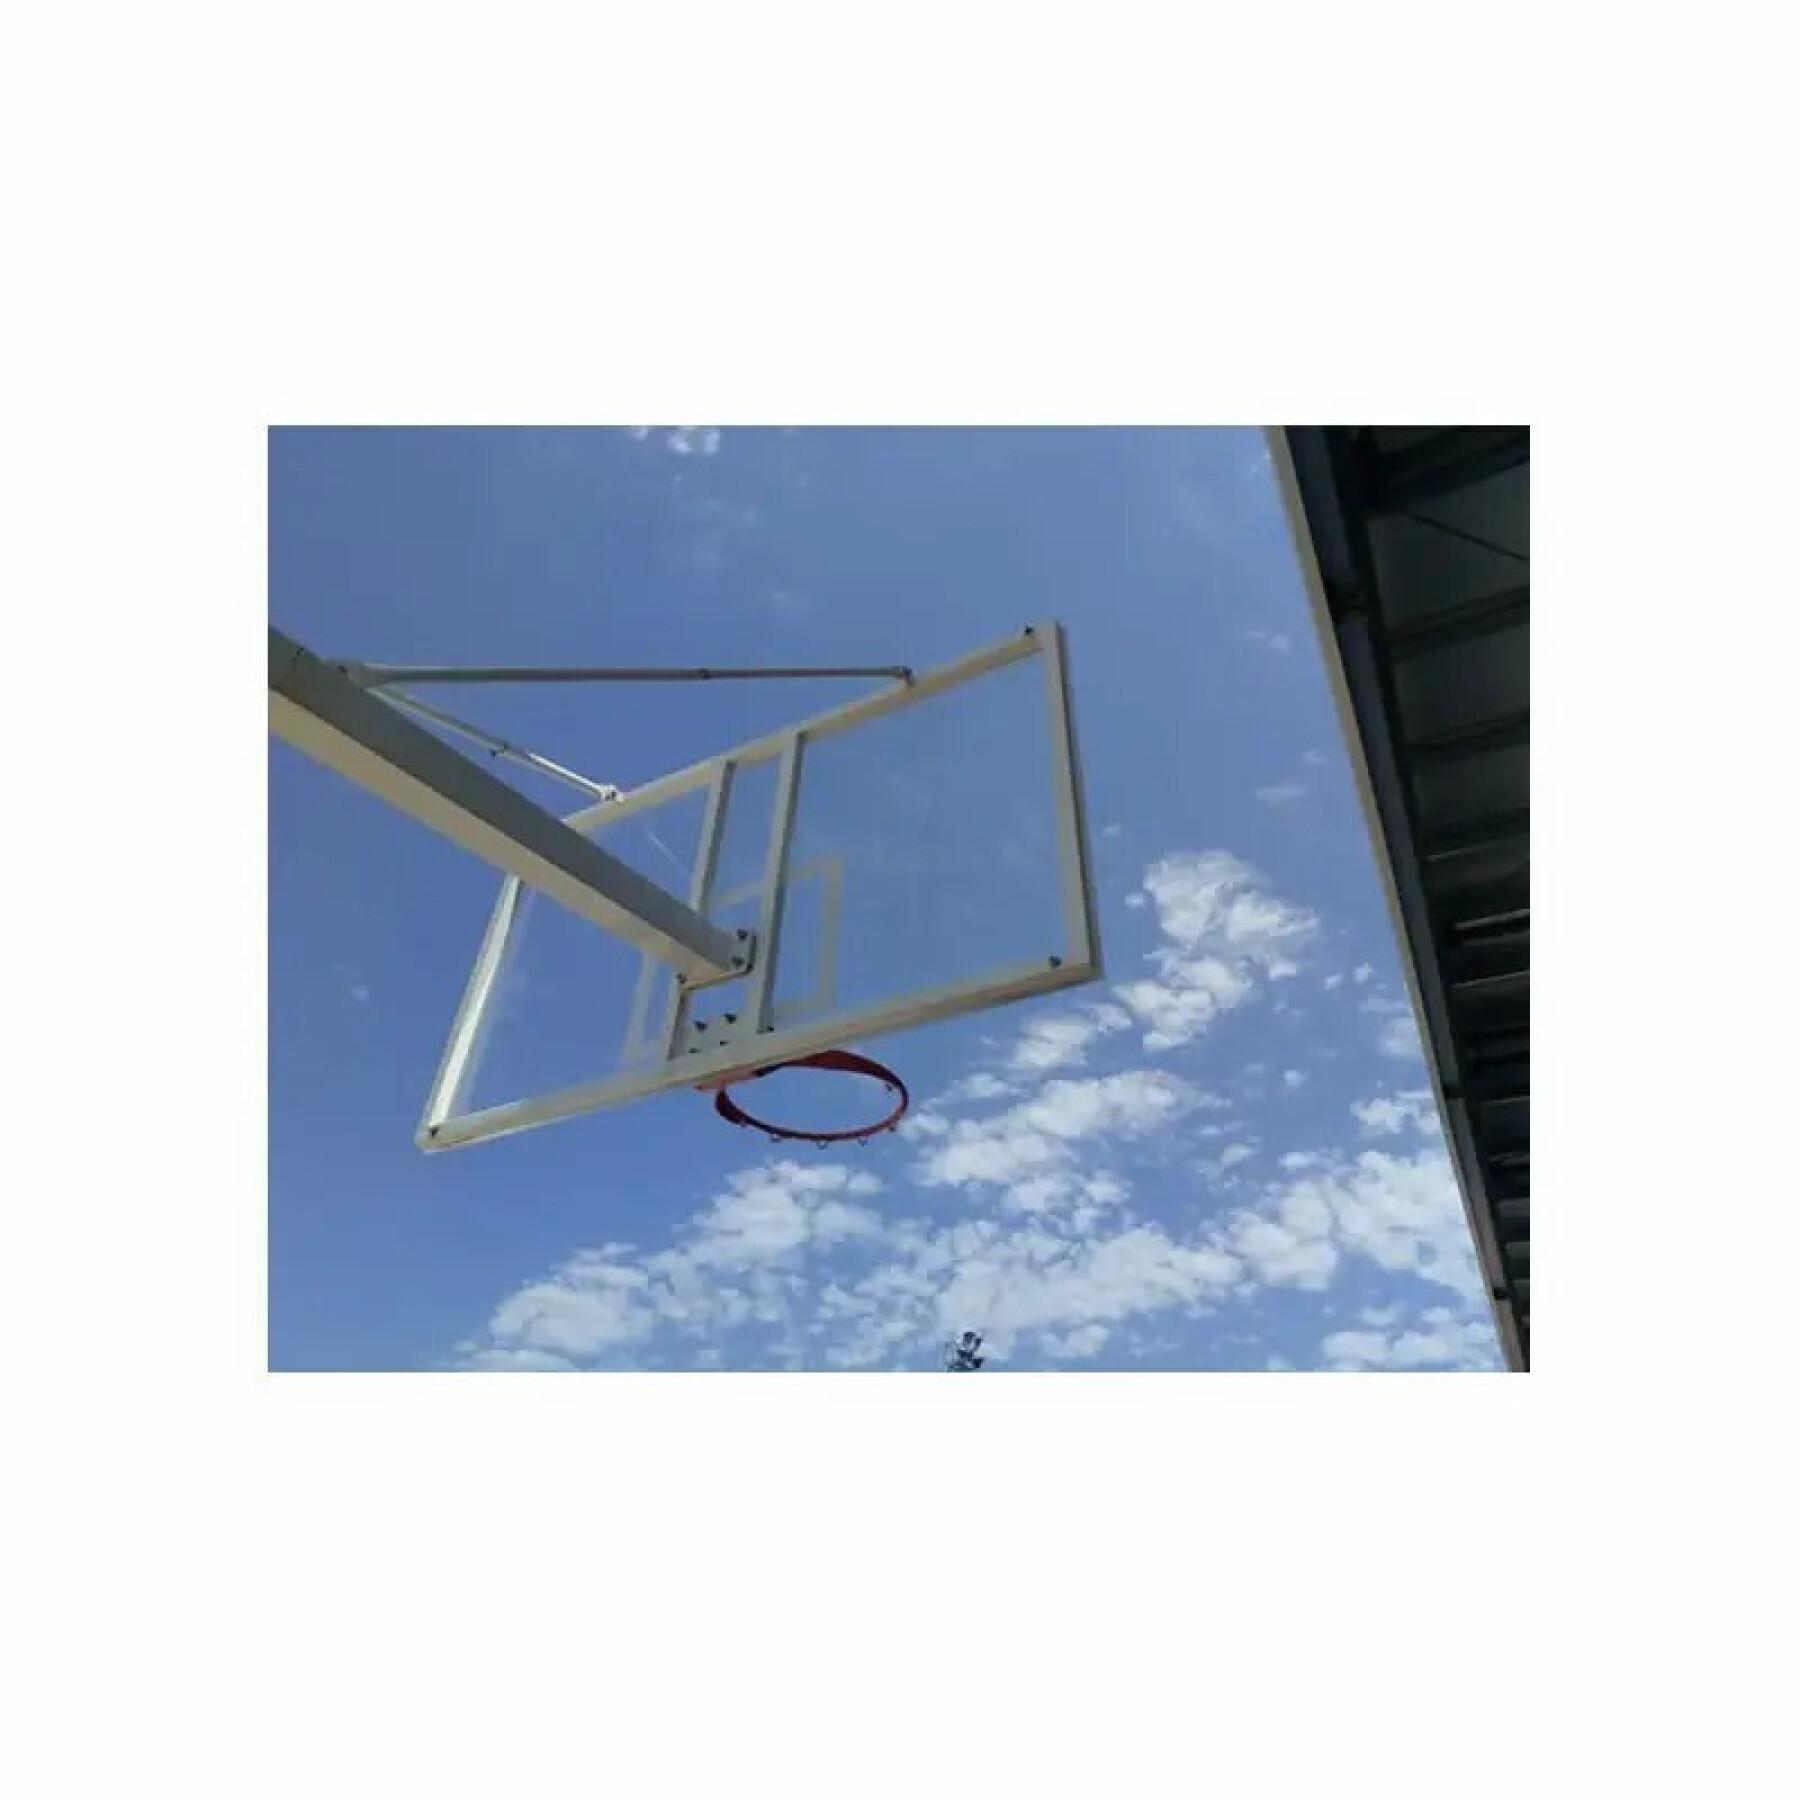 Set of 2 single-pipe basketball hoops with base for anchoring - no boards or hoops Softee Equipment Deluxe